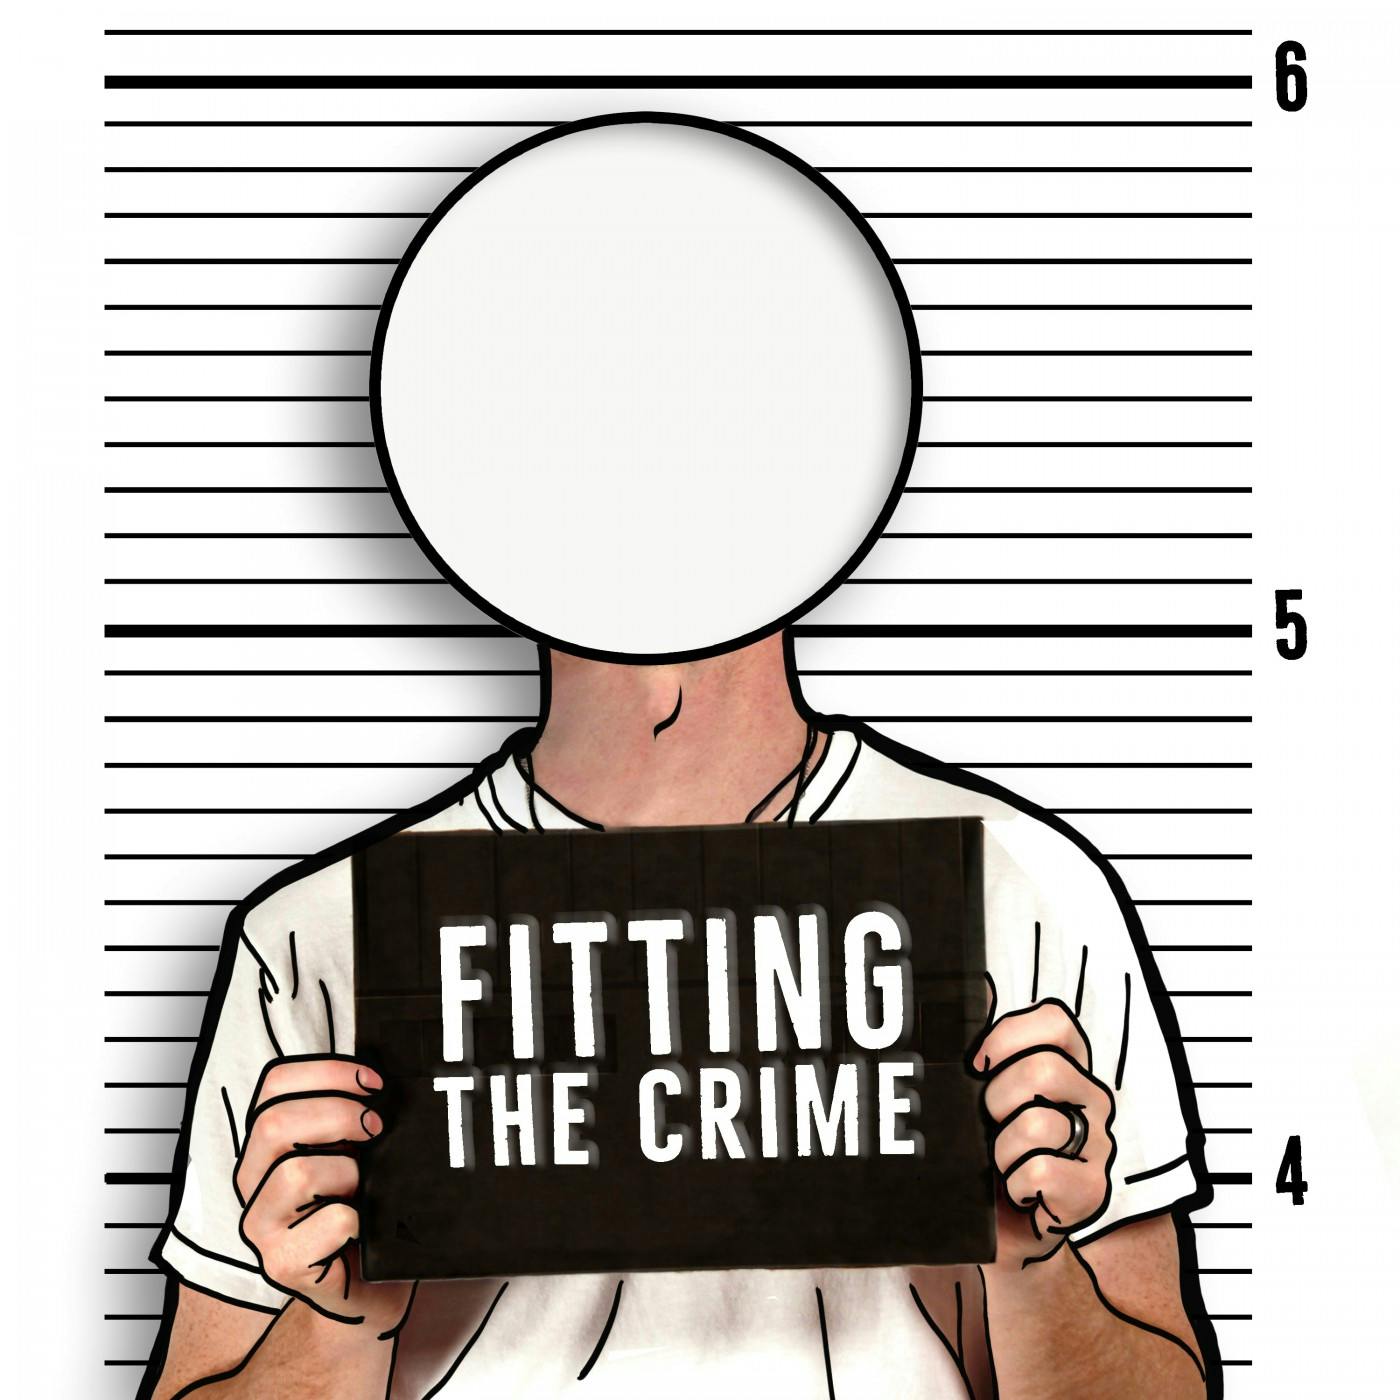 Fitting the Crime Part 1 - A Town On Edge